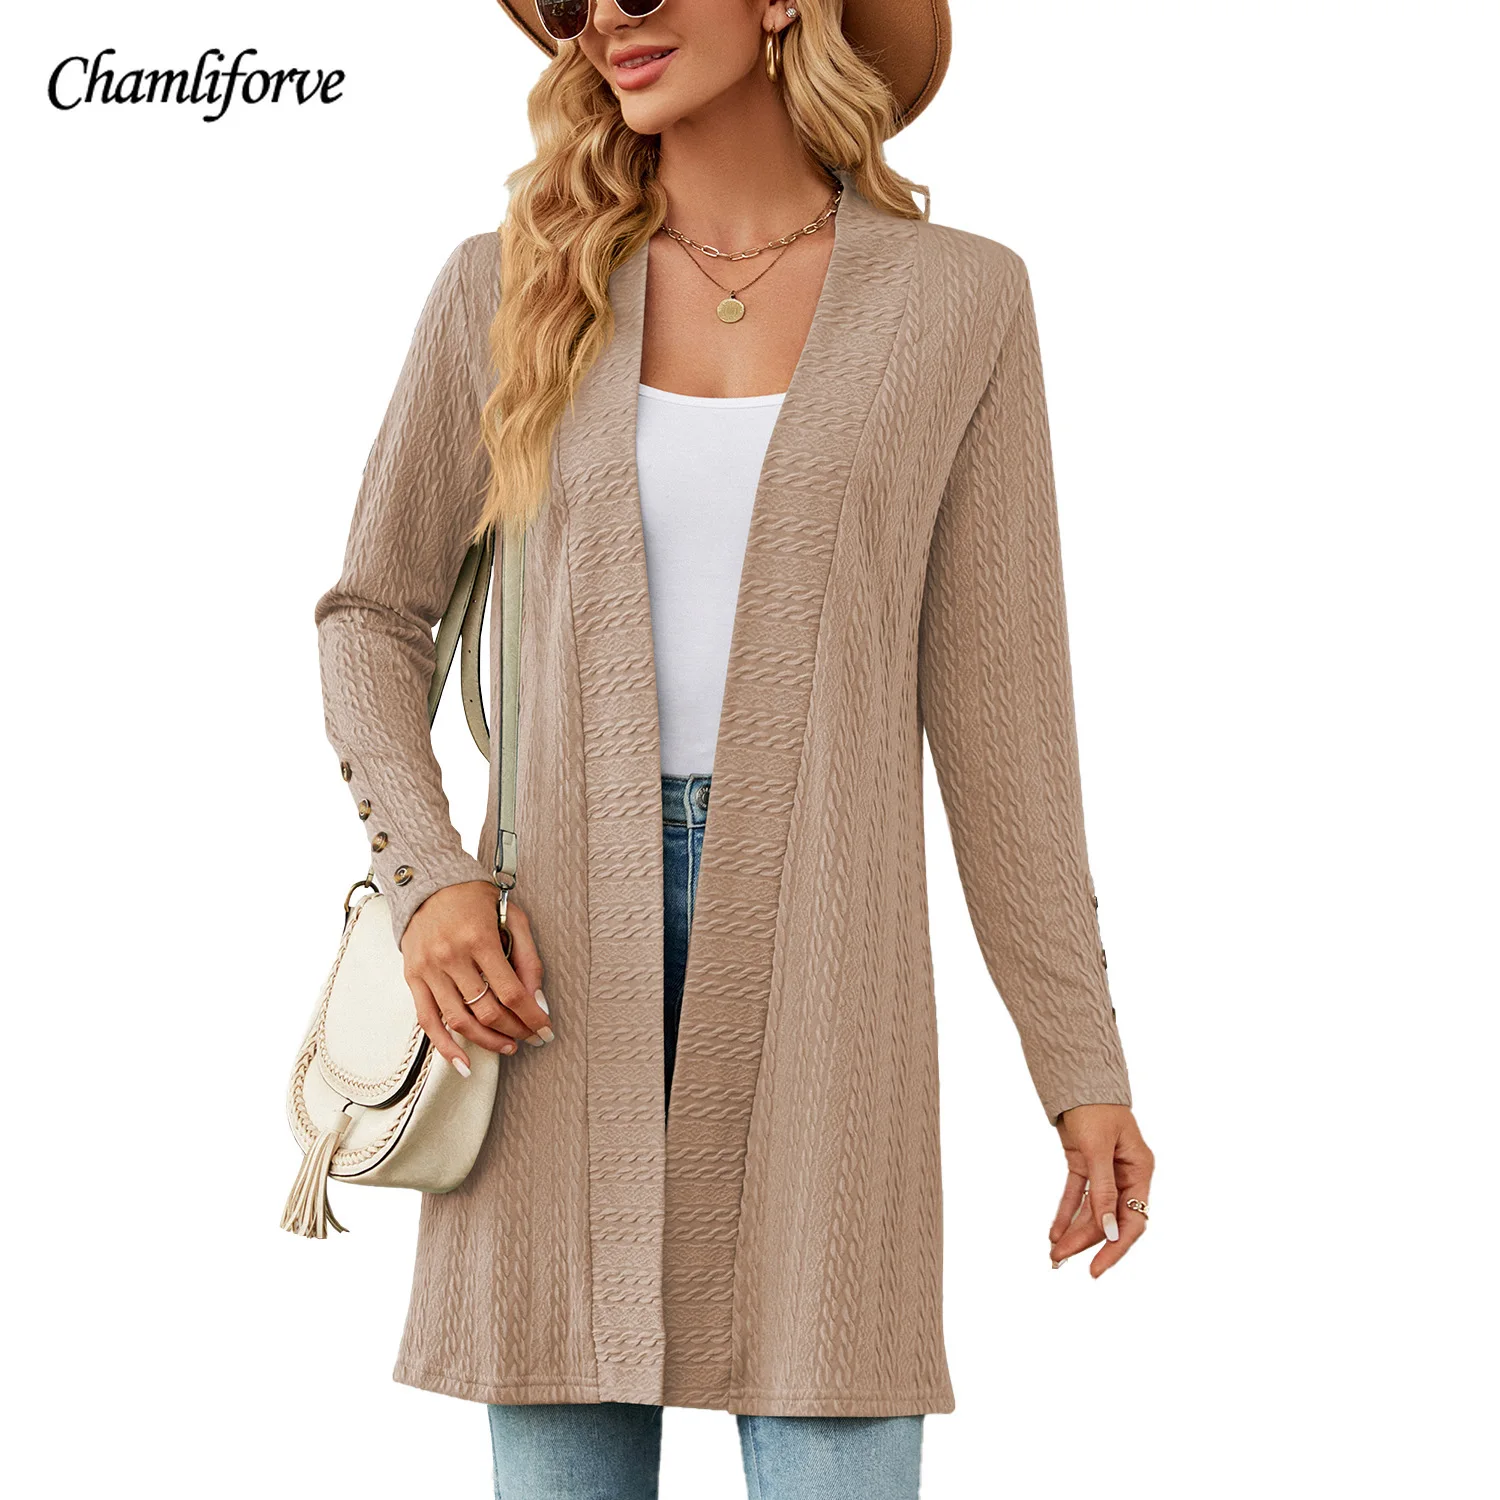 chamliforve 2023 autumn and winter new solid color button long sleeve loose cardigan coat for women coat women winter jacket new solid color knitted cardigan autumn and winter fashion loose sweater women s coat